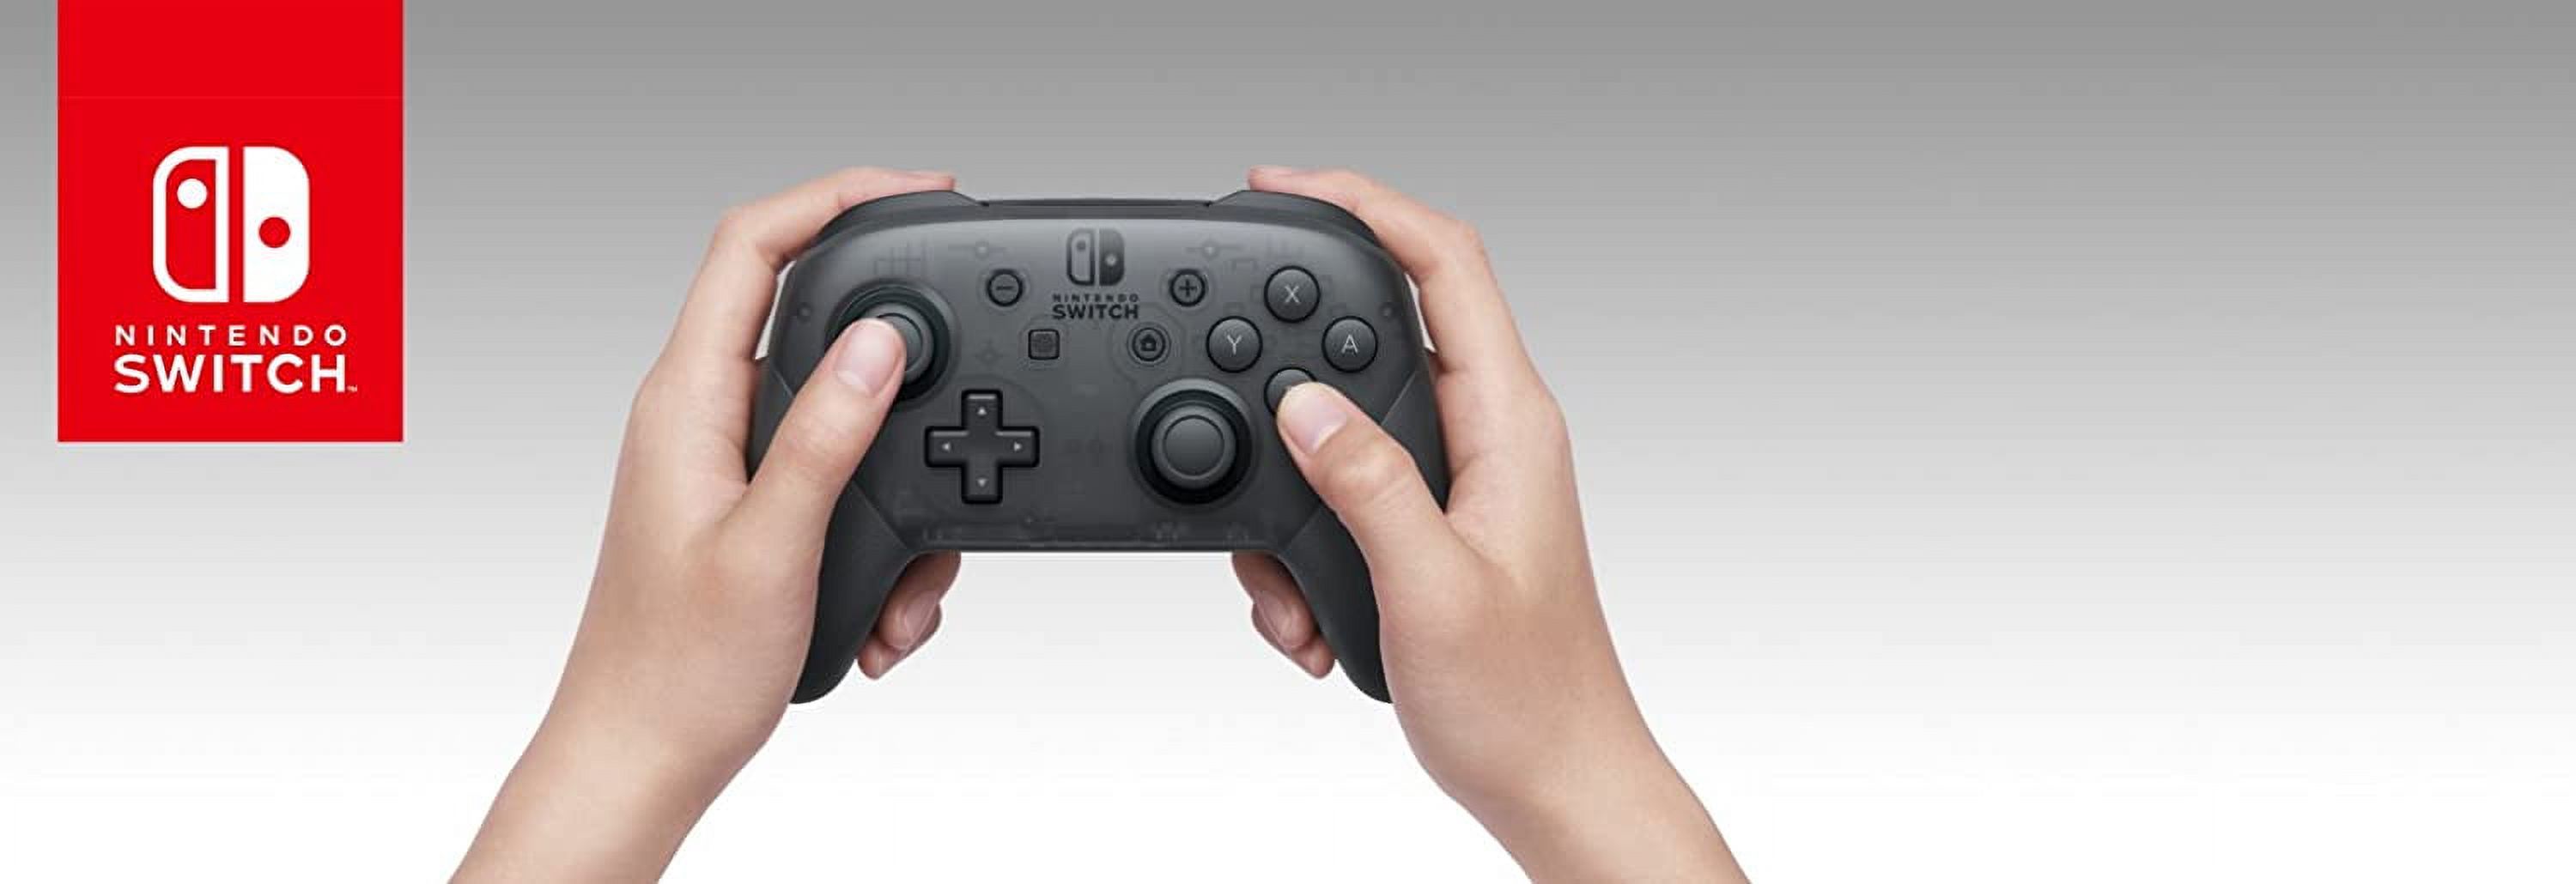 Nintendo Switch Pro Controller - image 5 of 5